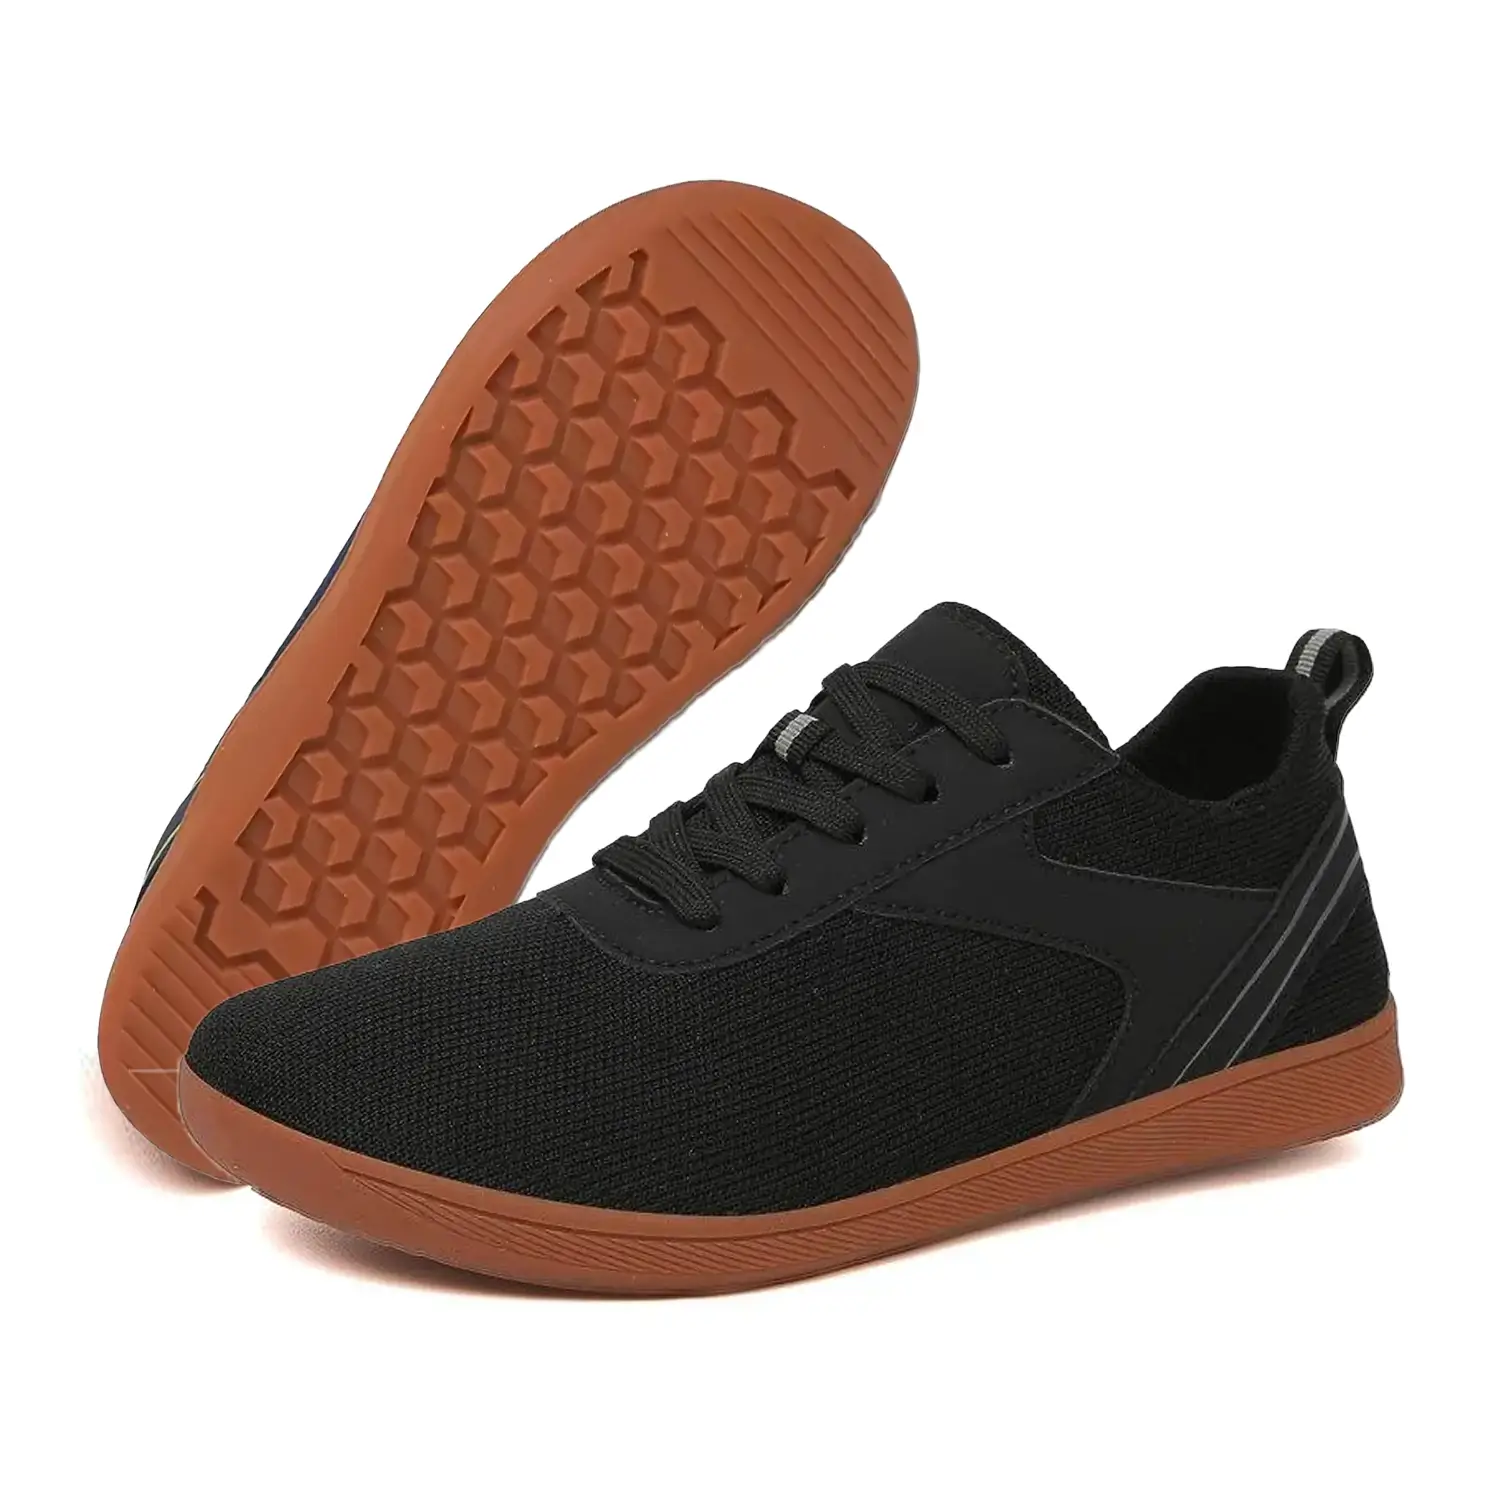 Purestep Native - Sneaker Barefoot Shoes (Unisex)